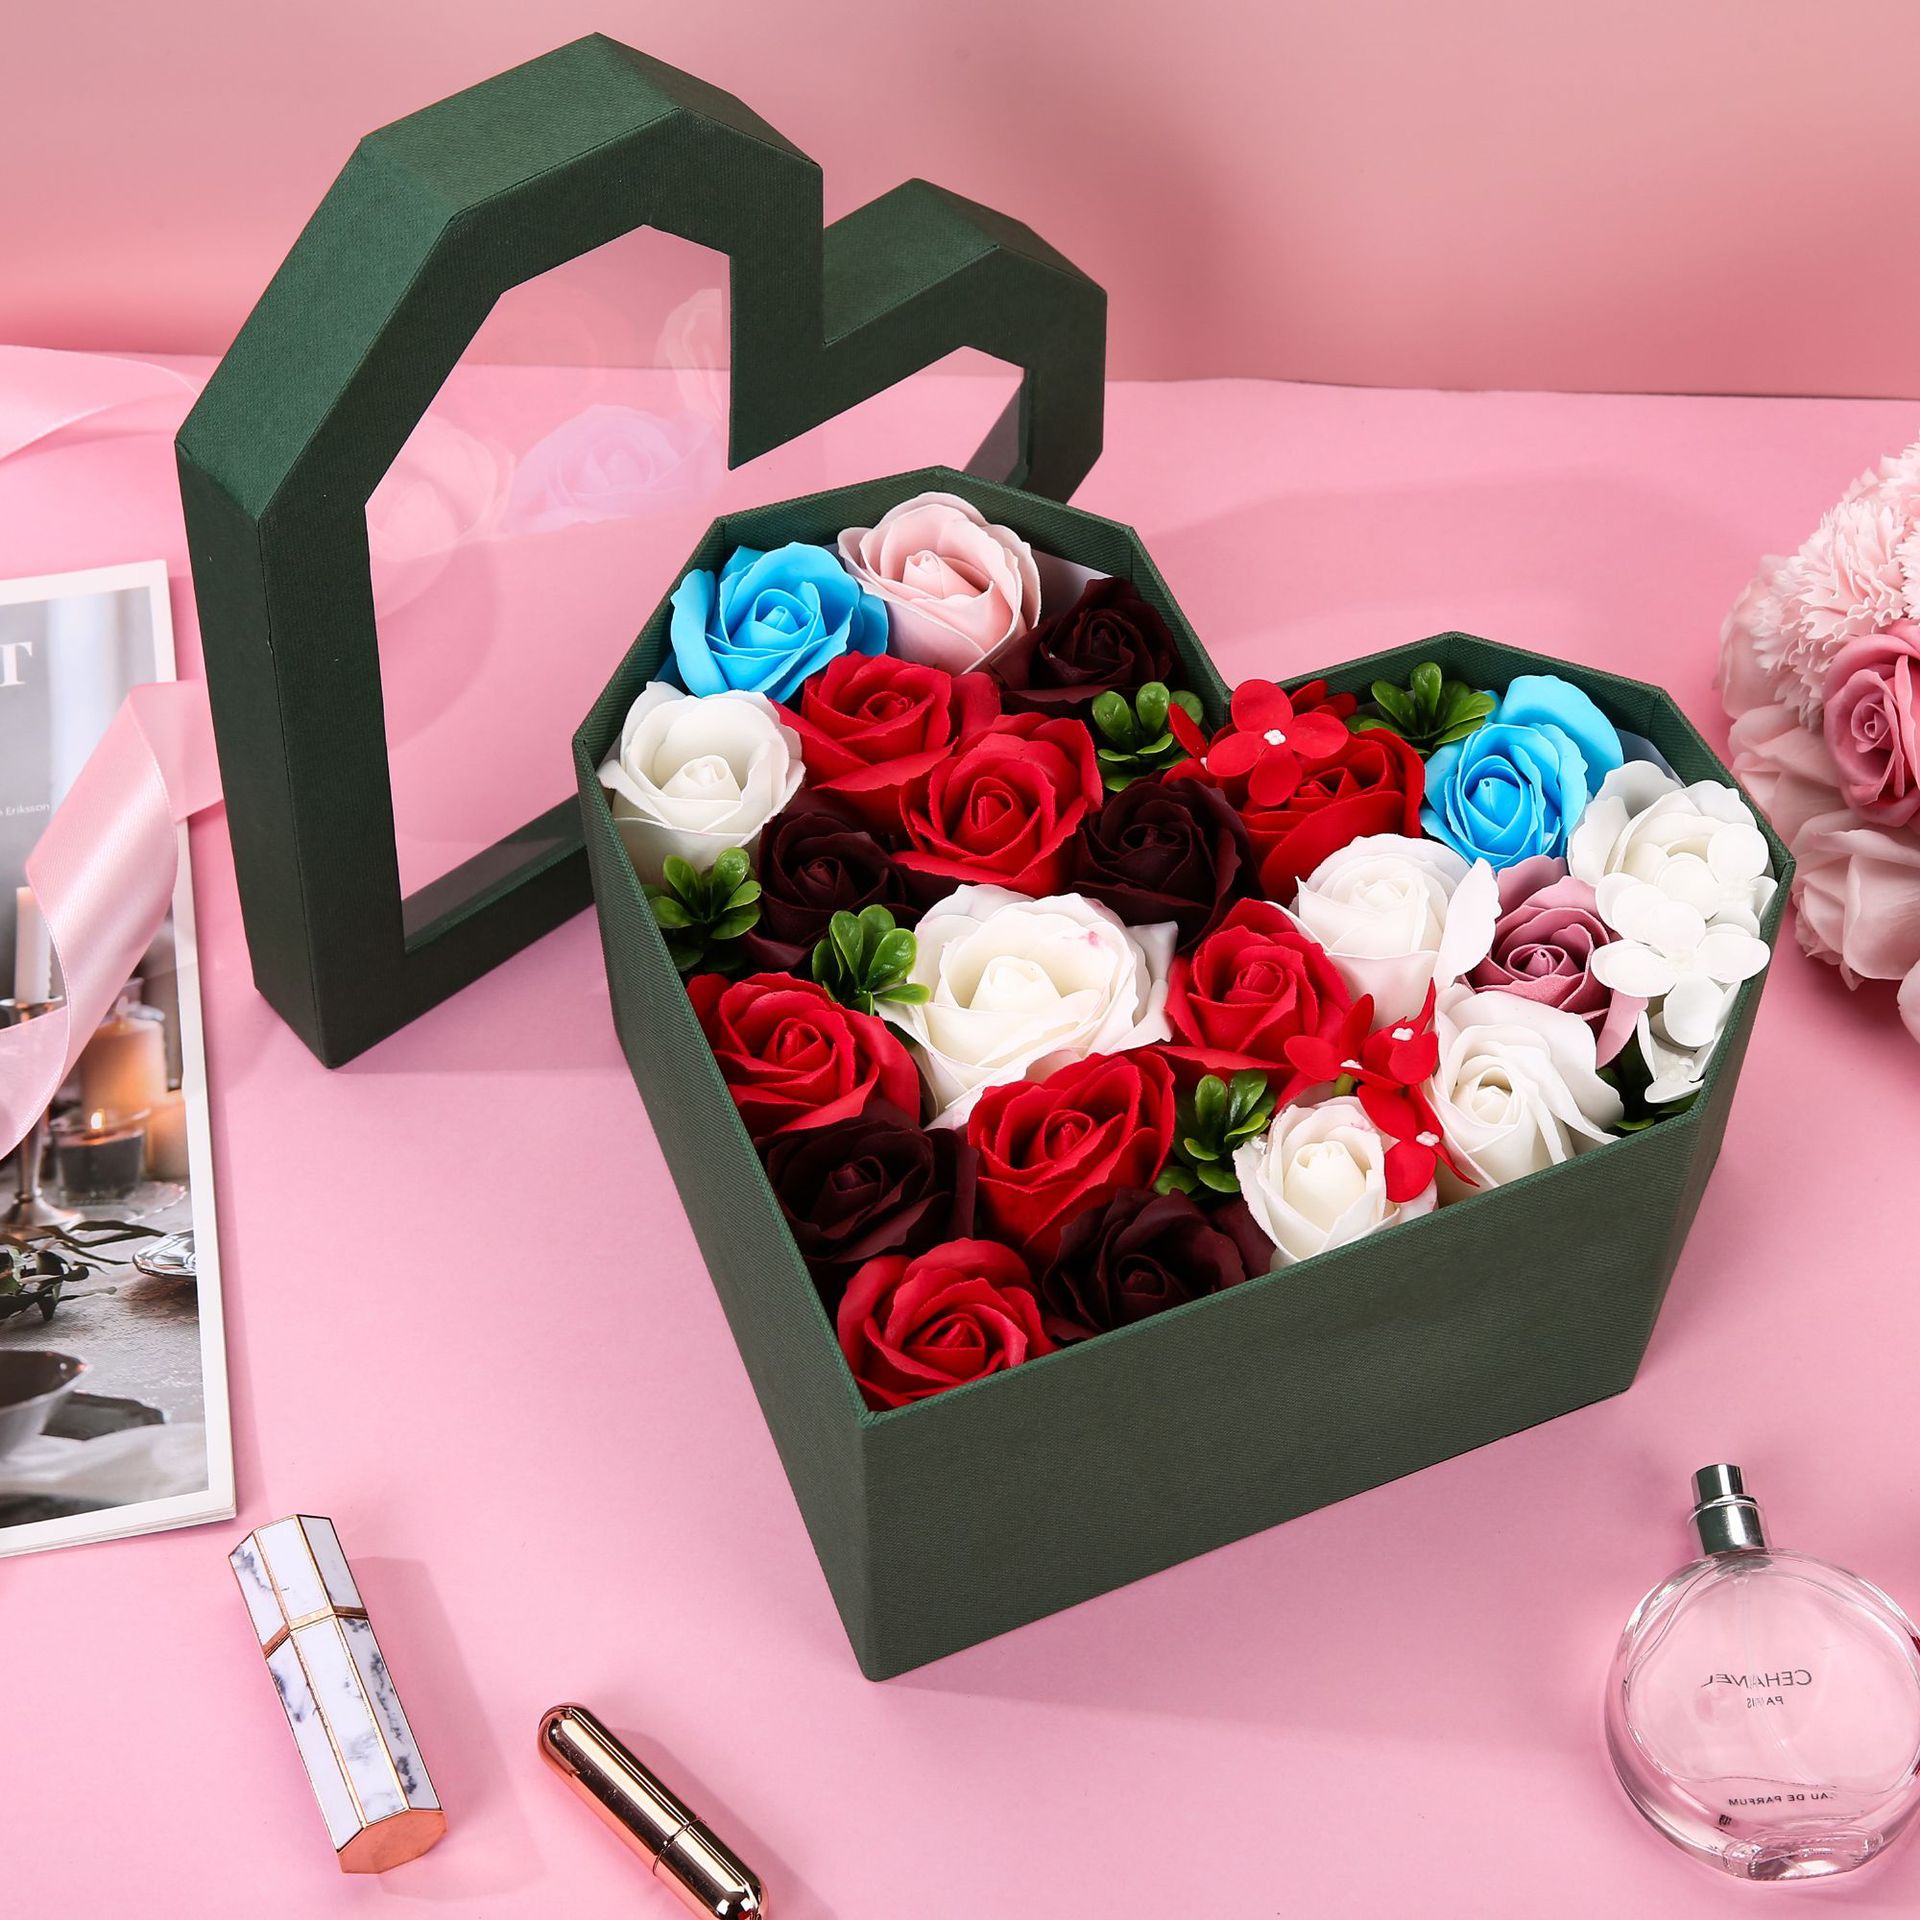 New arrival paper cardboard empty heart shape wedding rose soap flowers and chocolate gift packaging box with clear window